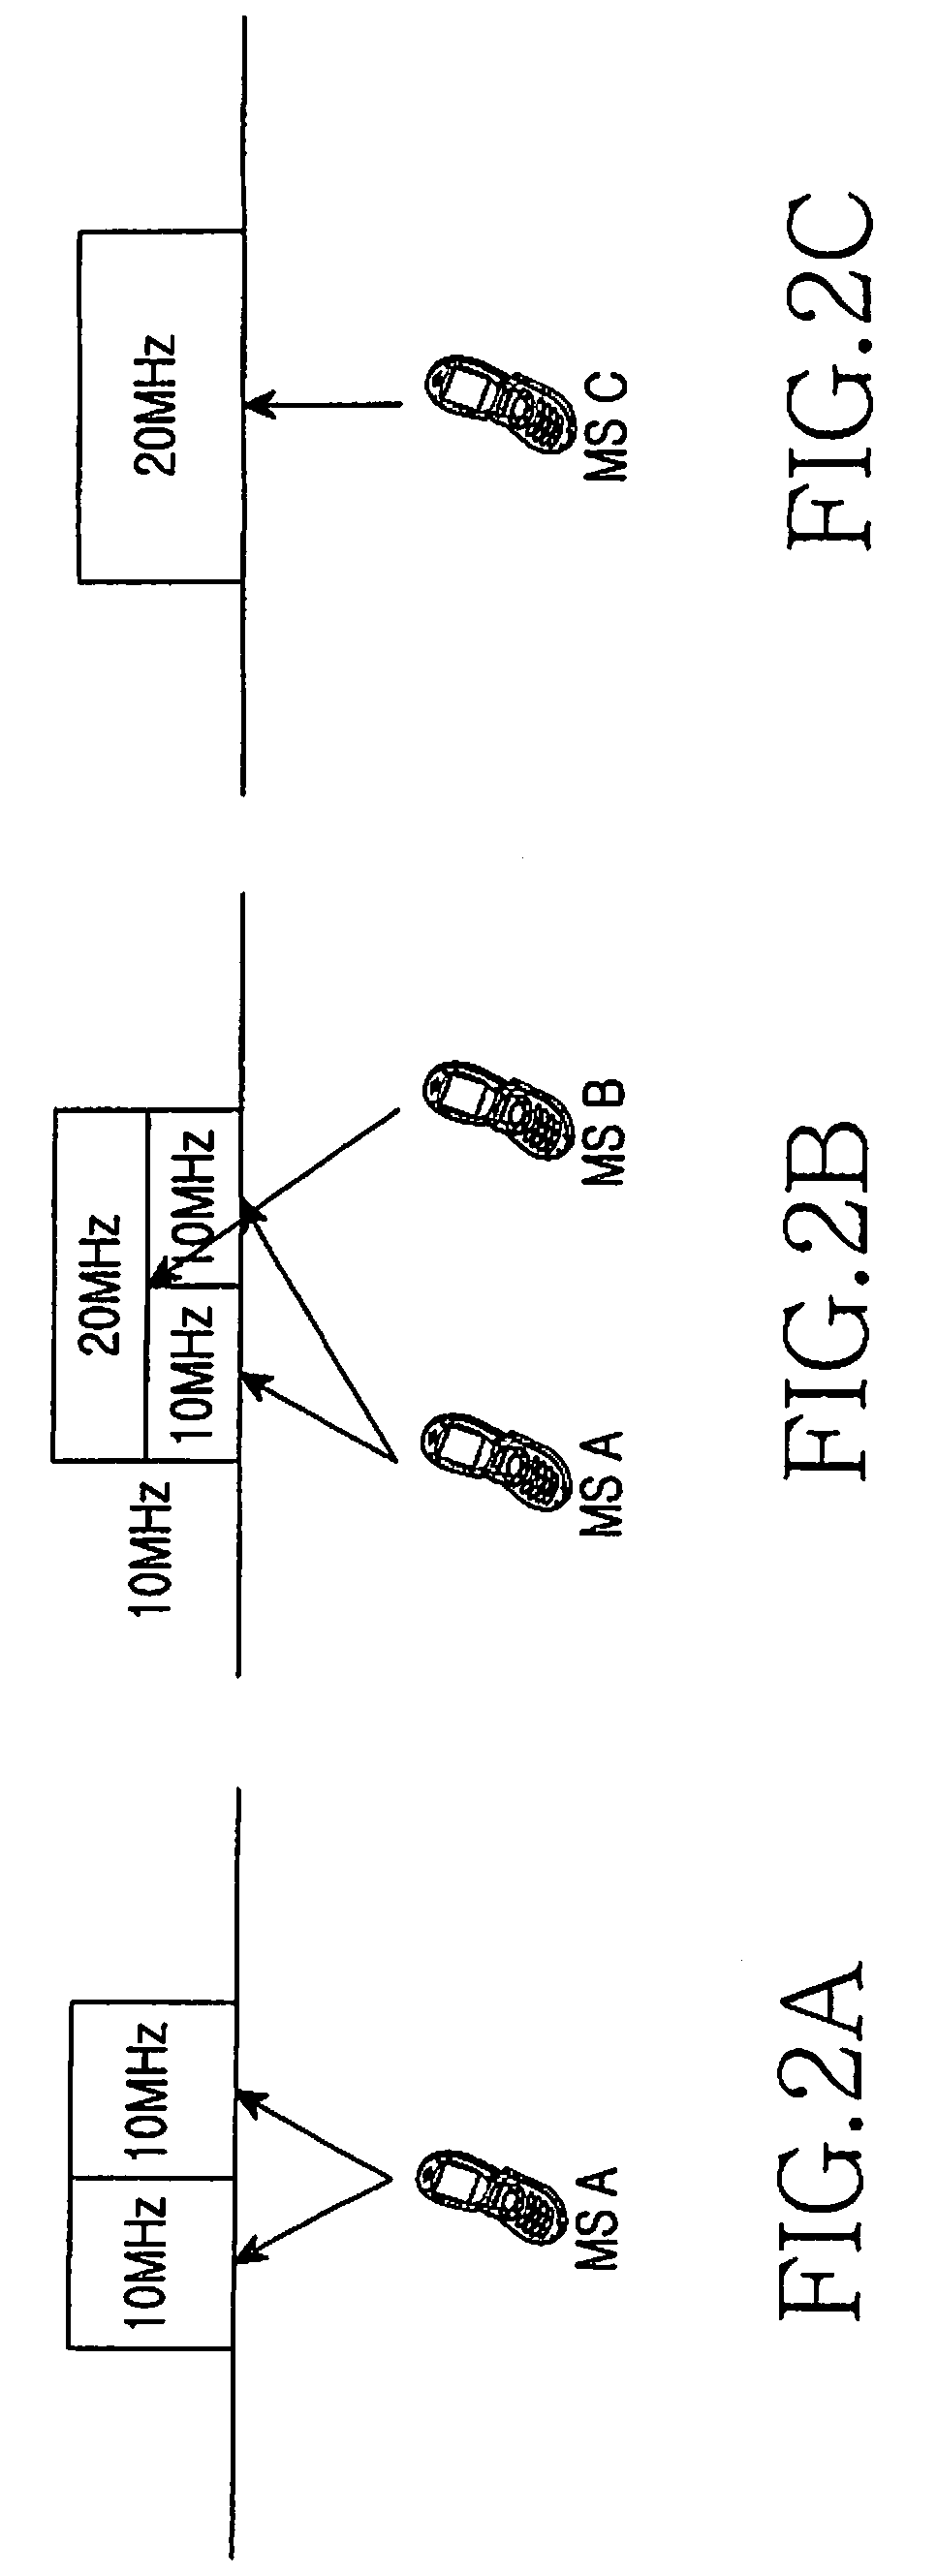 Apparatus and method for performing initial network entry in broadband wireless communication system